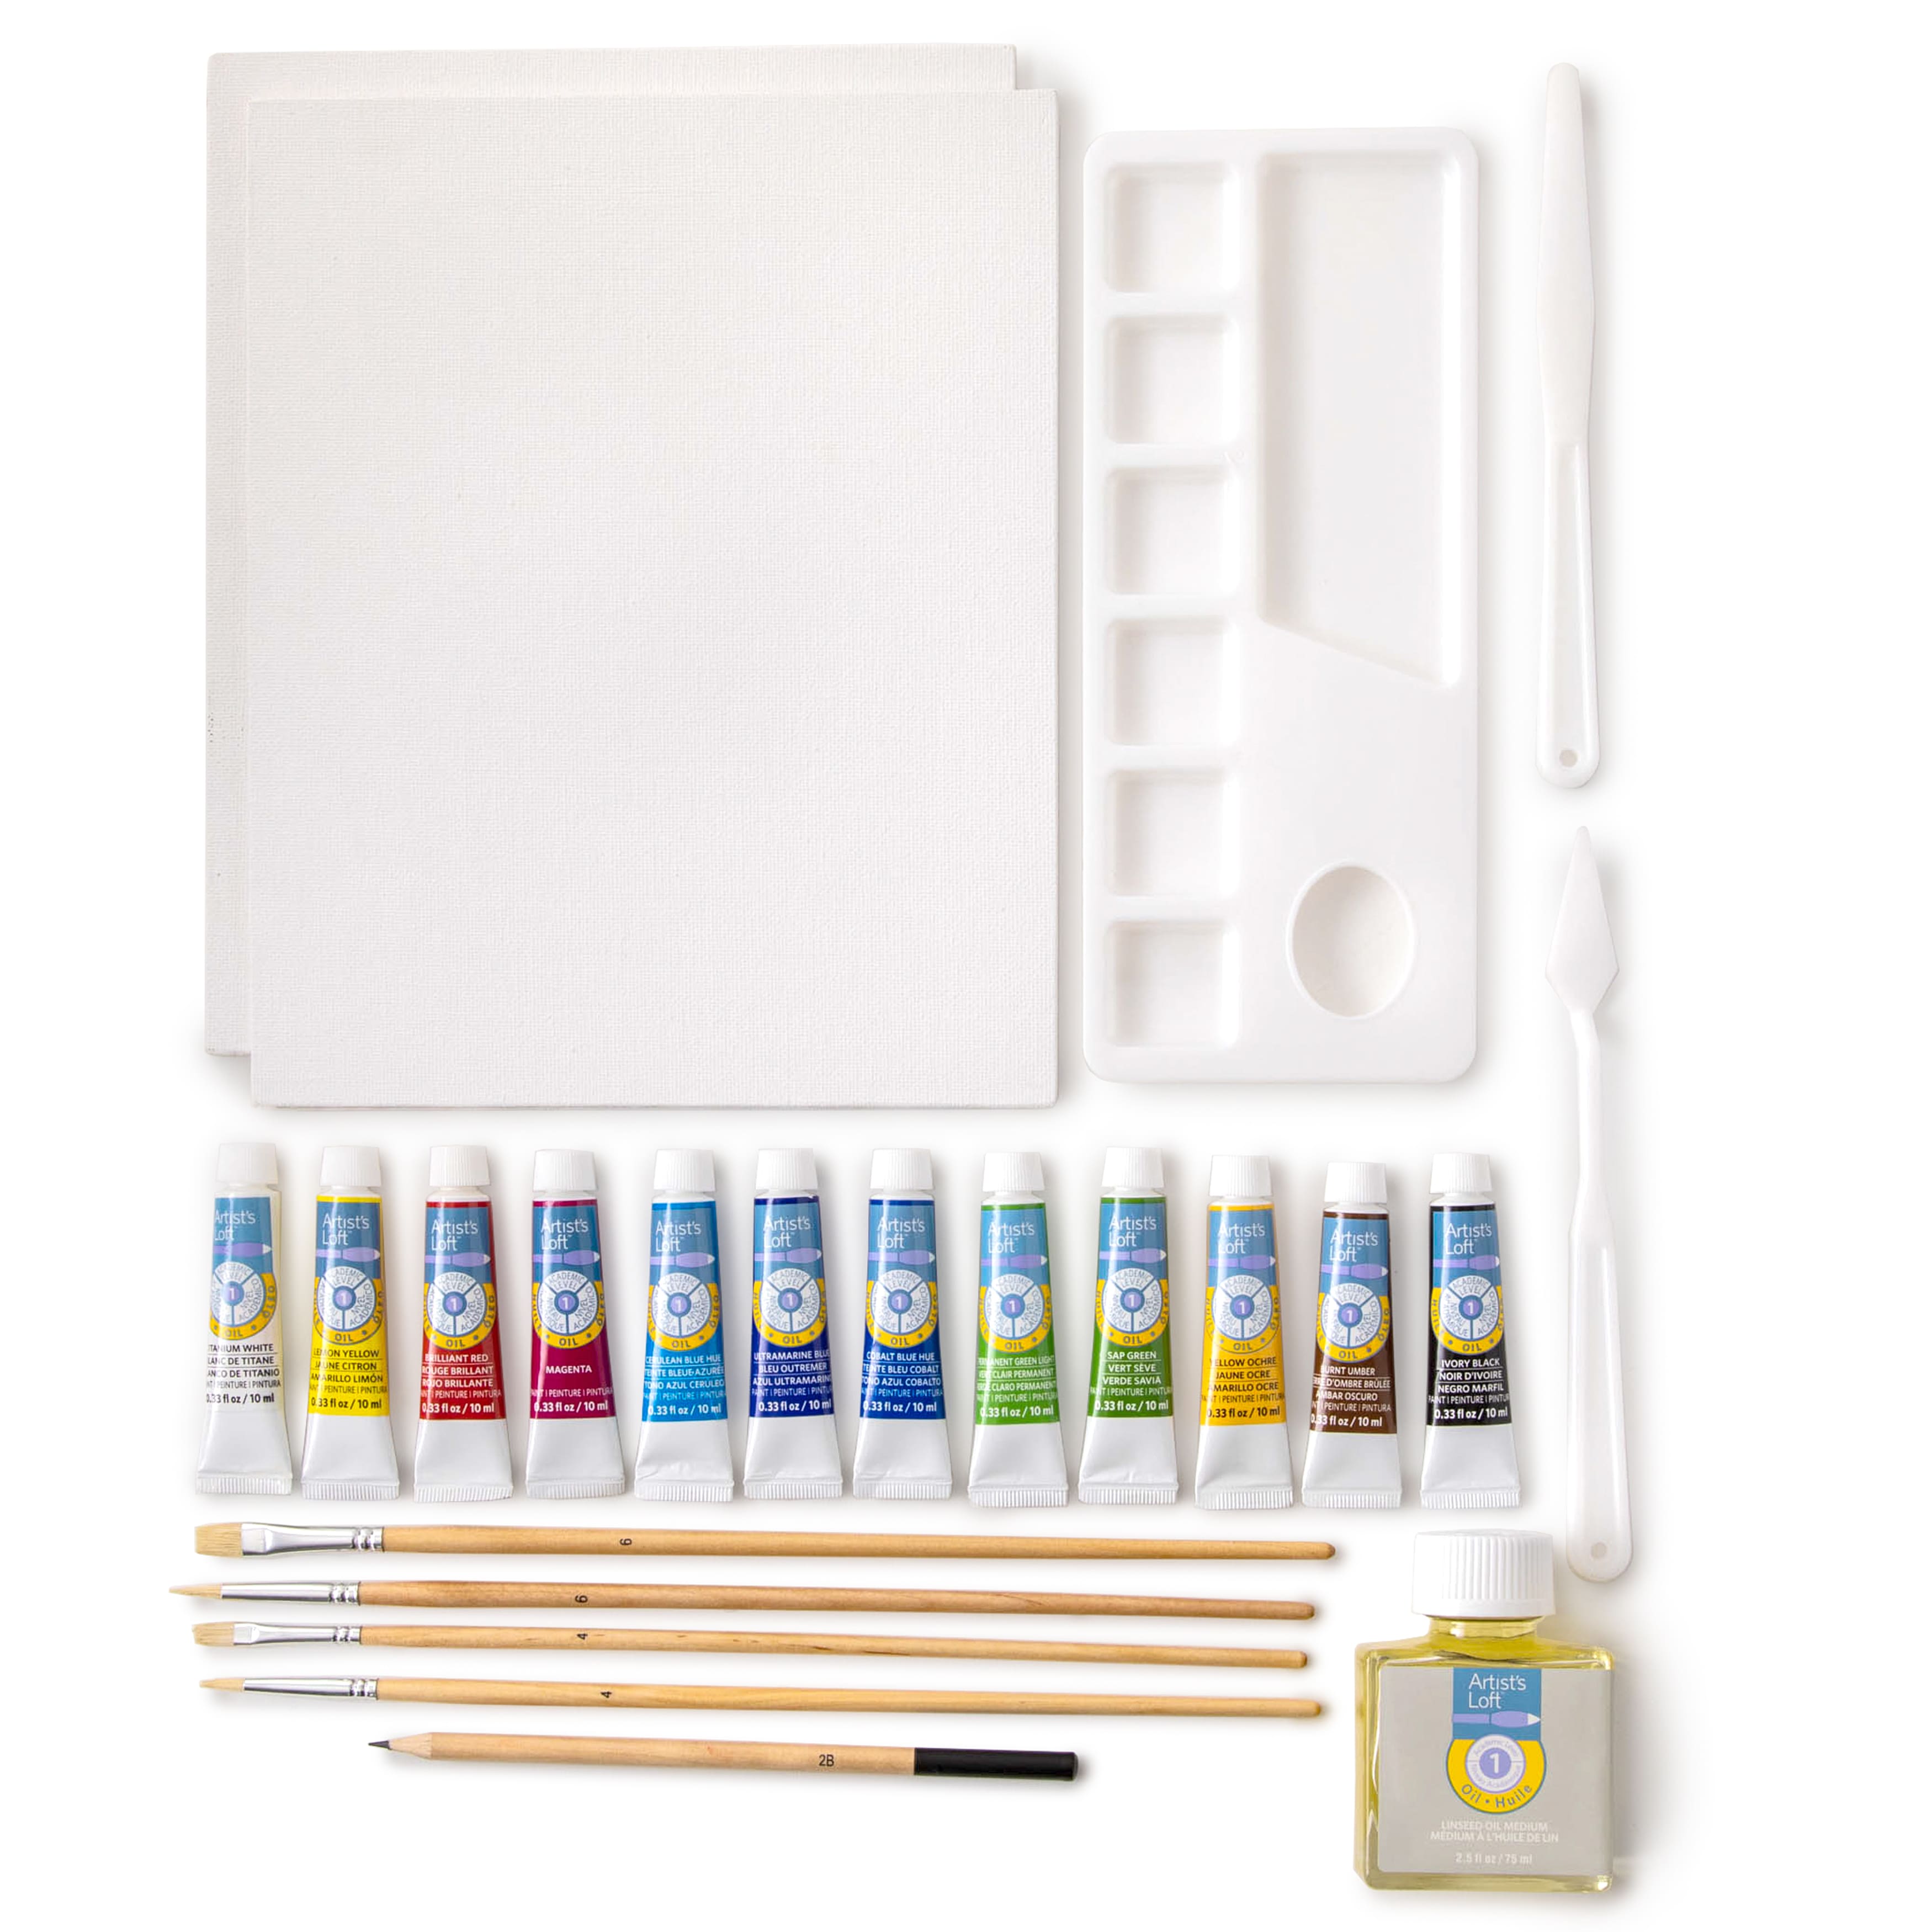 8 Pack: Level 1 Complete Acrylic Painting Set by Artist's Loft